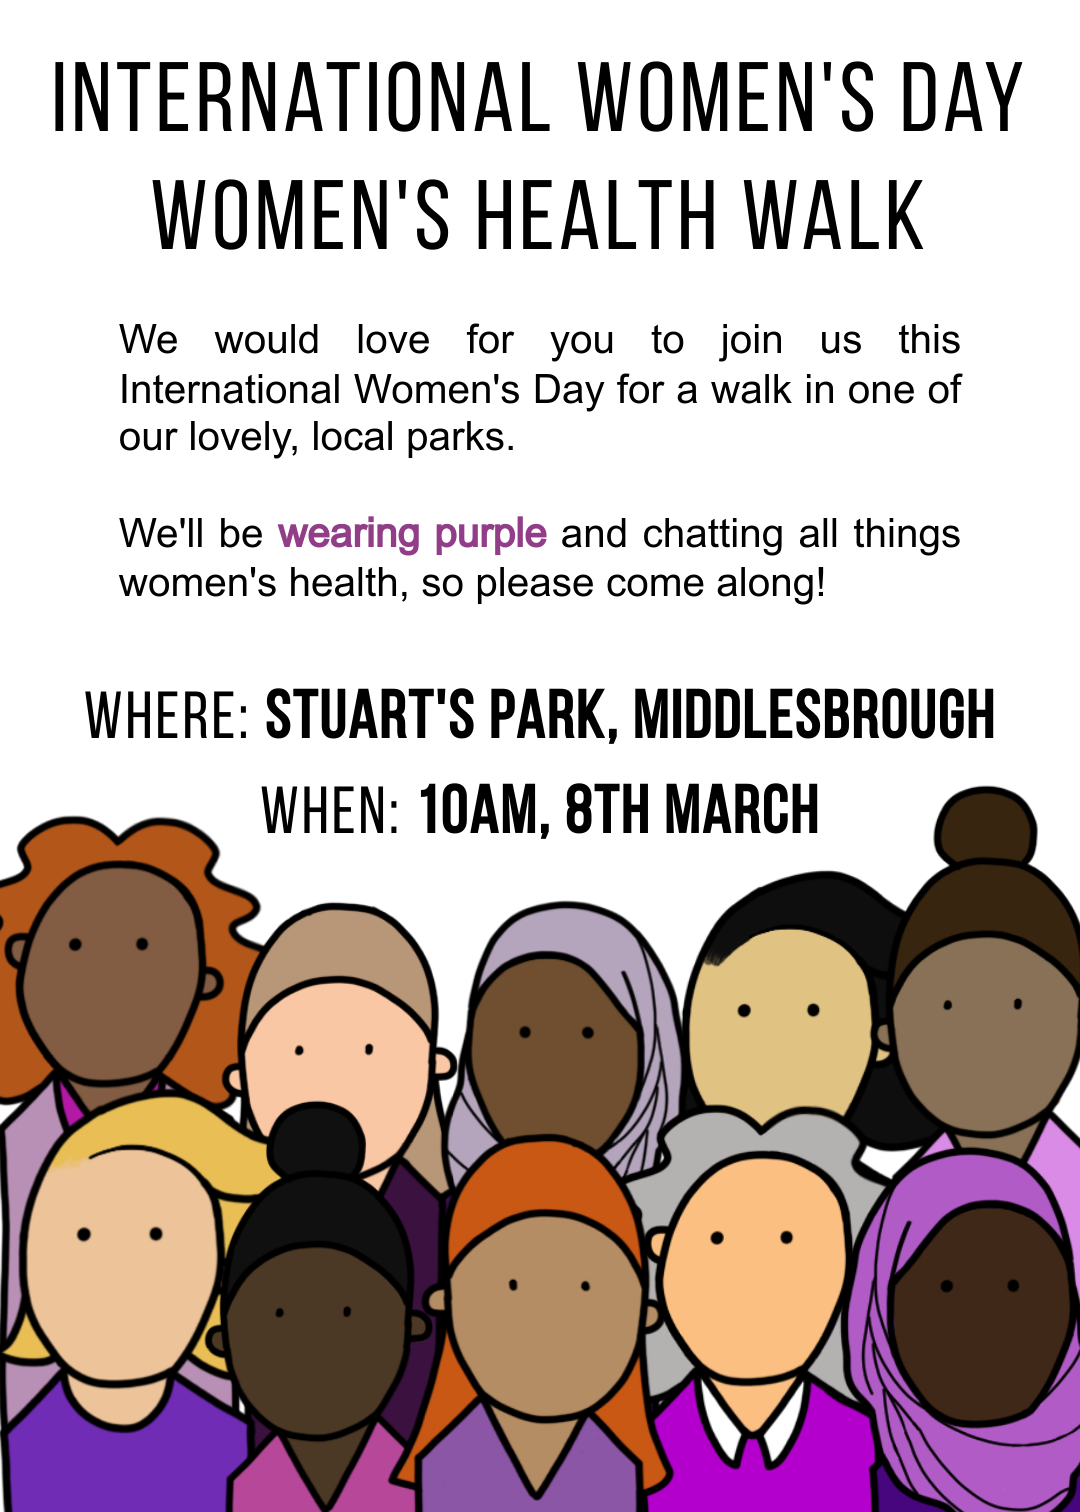 A flyer with ten different cartoons of women in purple outfits across the bottom. The text reads: International women's day women's health walk. We would love for you to join us this International Women's Day for a walk in one of our lovely, local parks. We'll be wearing purple and chatting all things women's health, so please come along. Where: Stuart's Park, Middlesbrough. When: 10am, 8th March